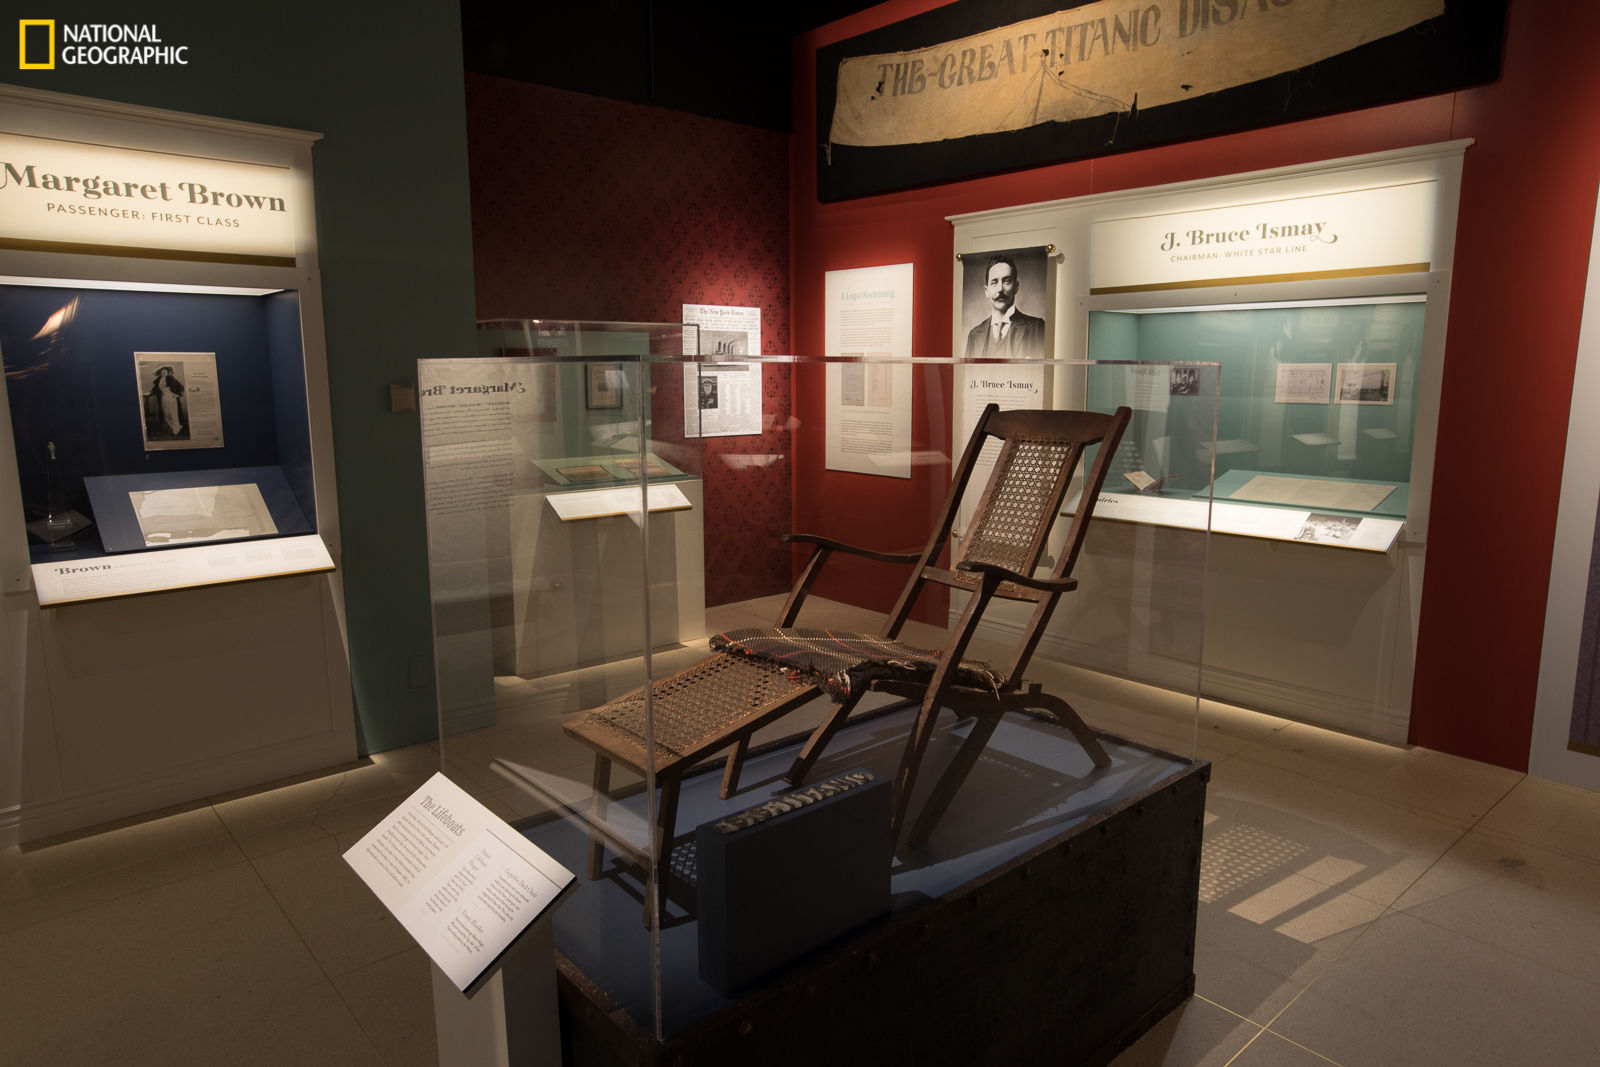 This deck chair from the Carpathia is the only known chair left in existence. Laying on the chair is a White Star Line wool blanket which was used by a survivor from one of the Titanic lifeboats. (Rebecca Hale/National Geographic)